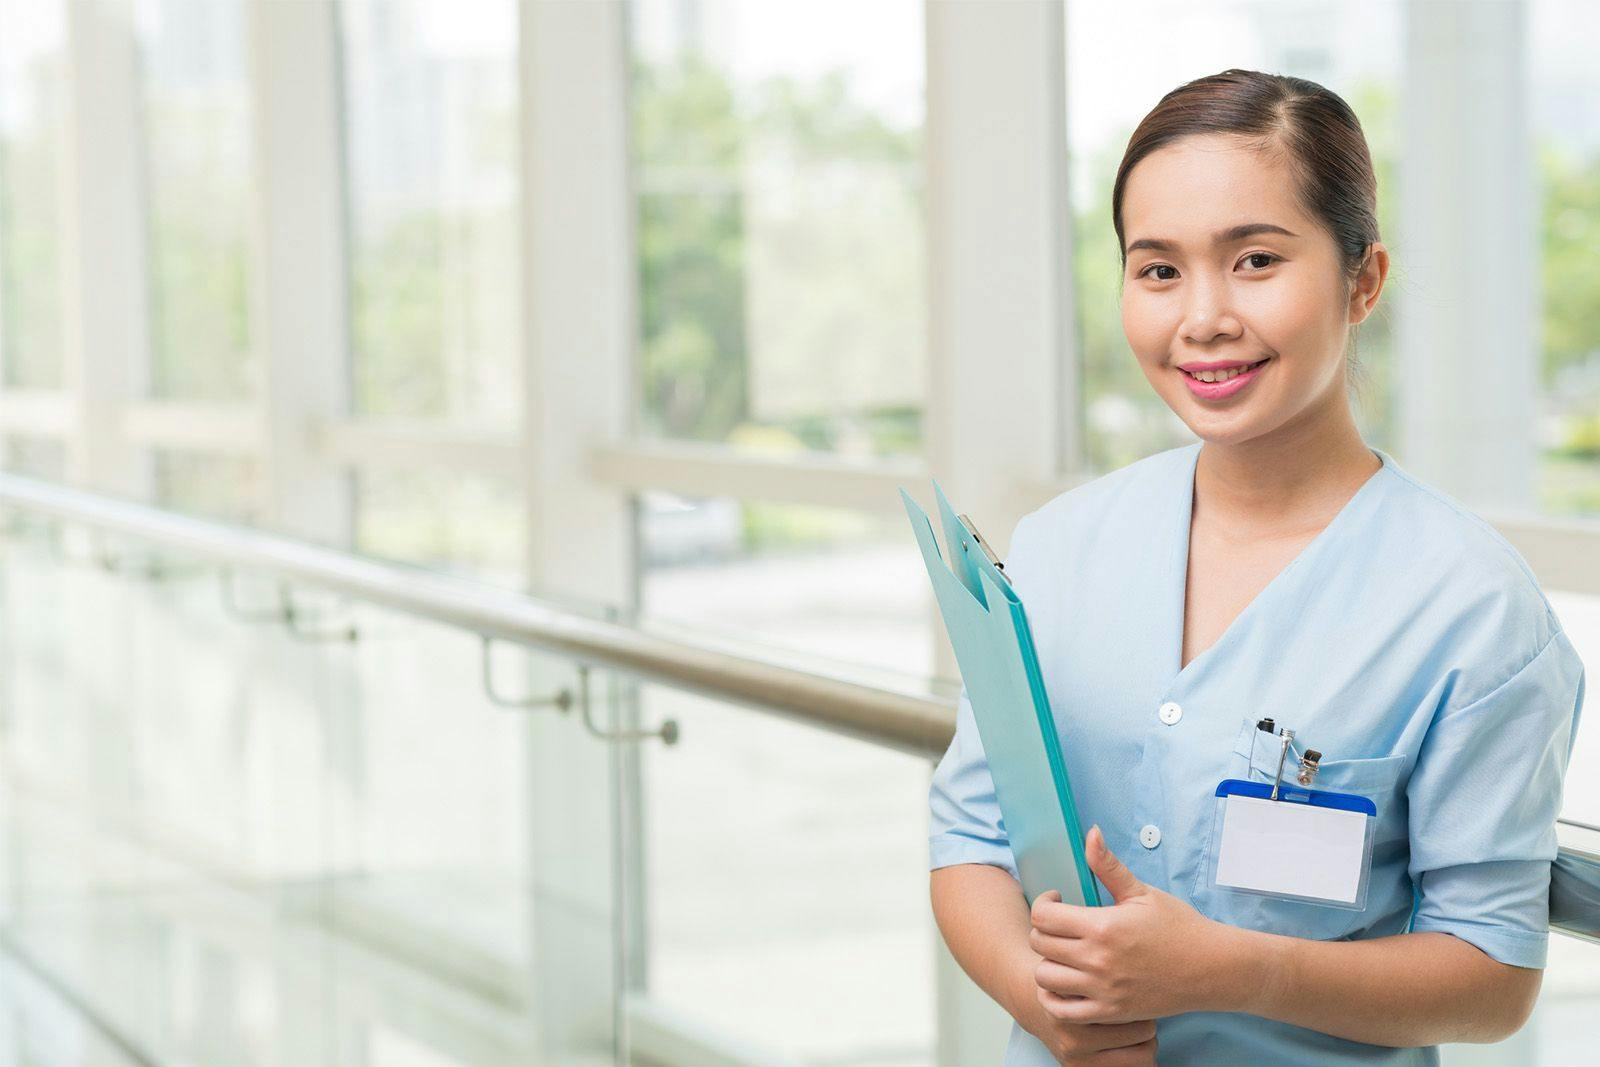 Medical Assistant Externships – How to Find One and Launch Your Career